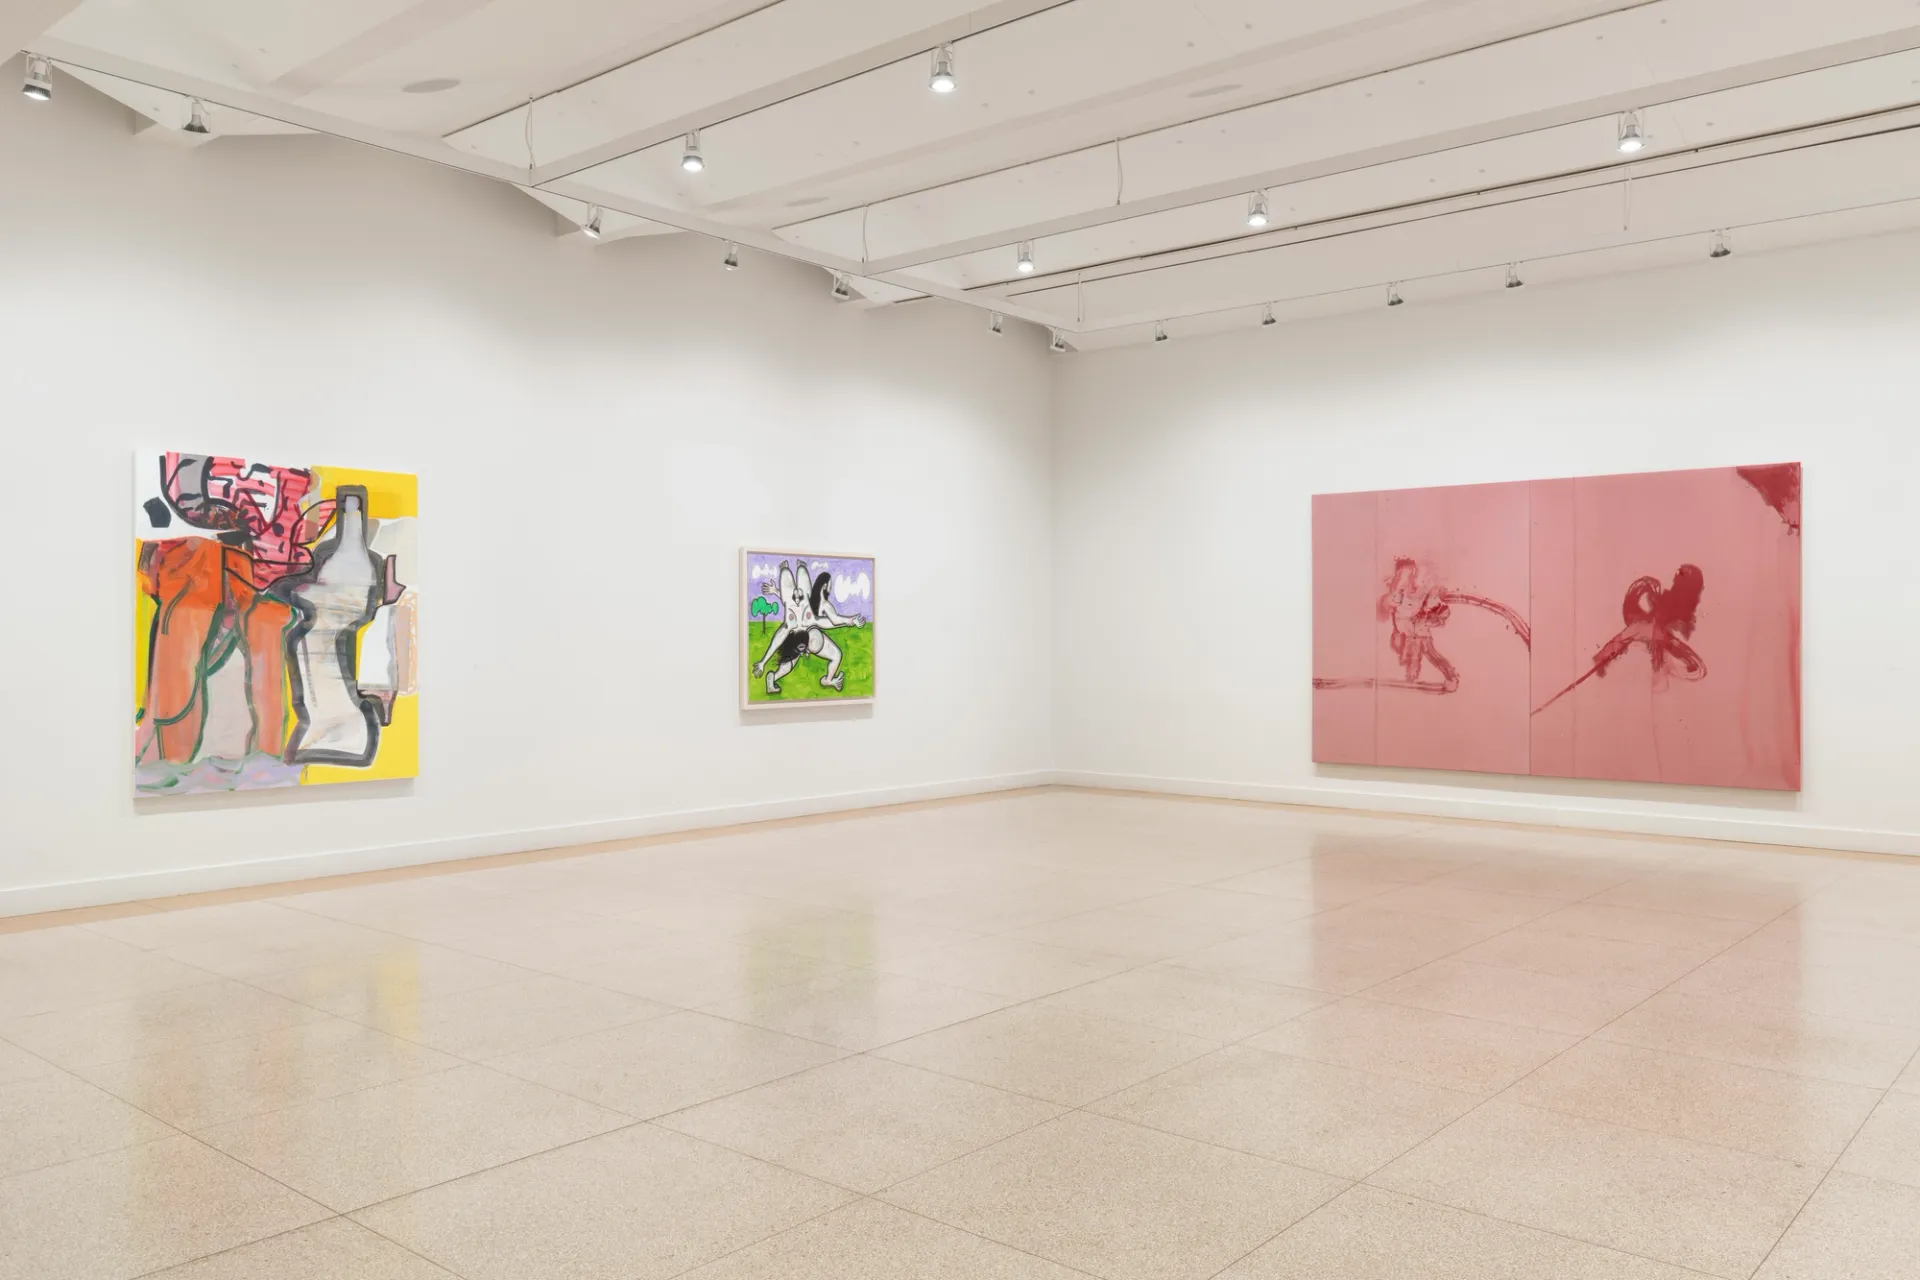 Three colorful paintings hang on a wall. To the left, a large and small piece hang parallel to each other. To the right, a large horizontal artwork takes up the majority of the wall